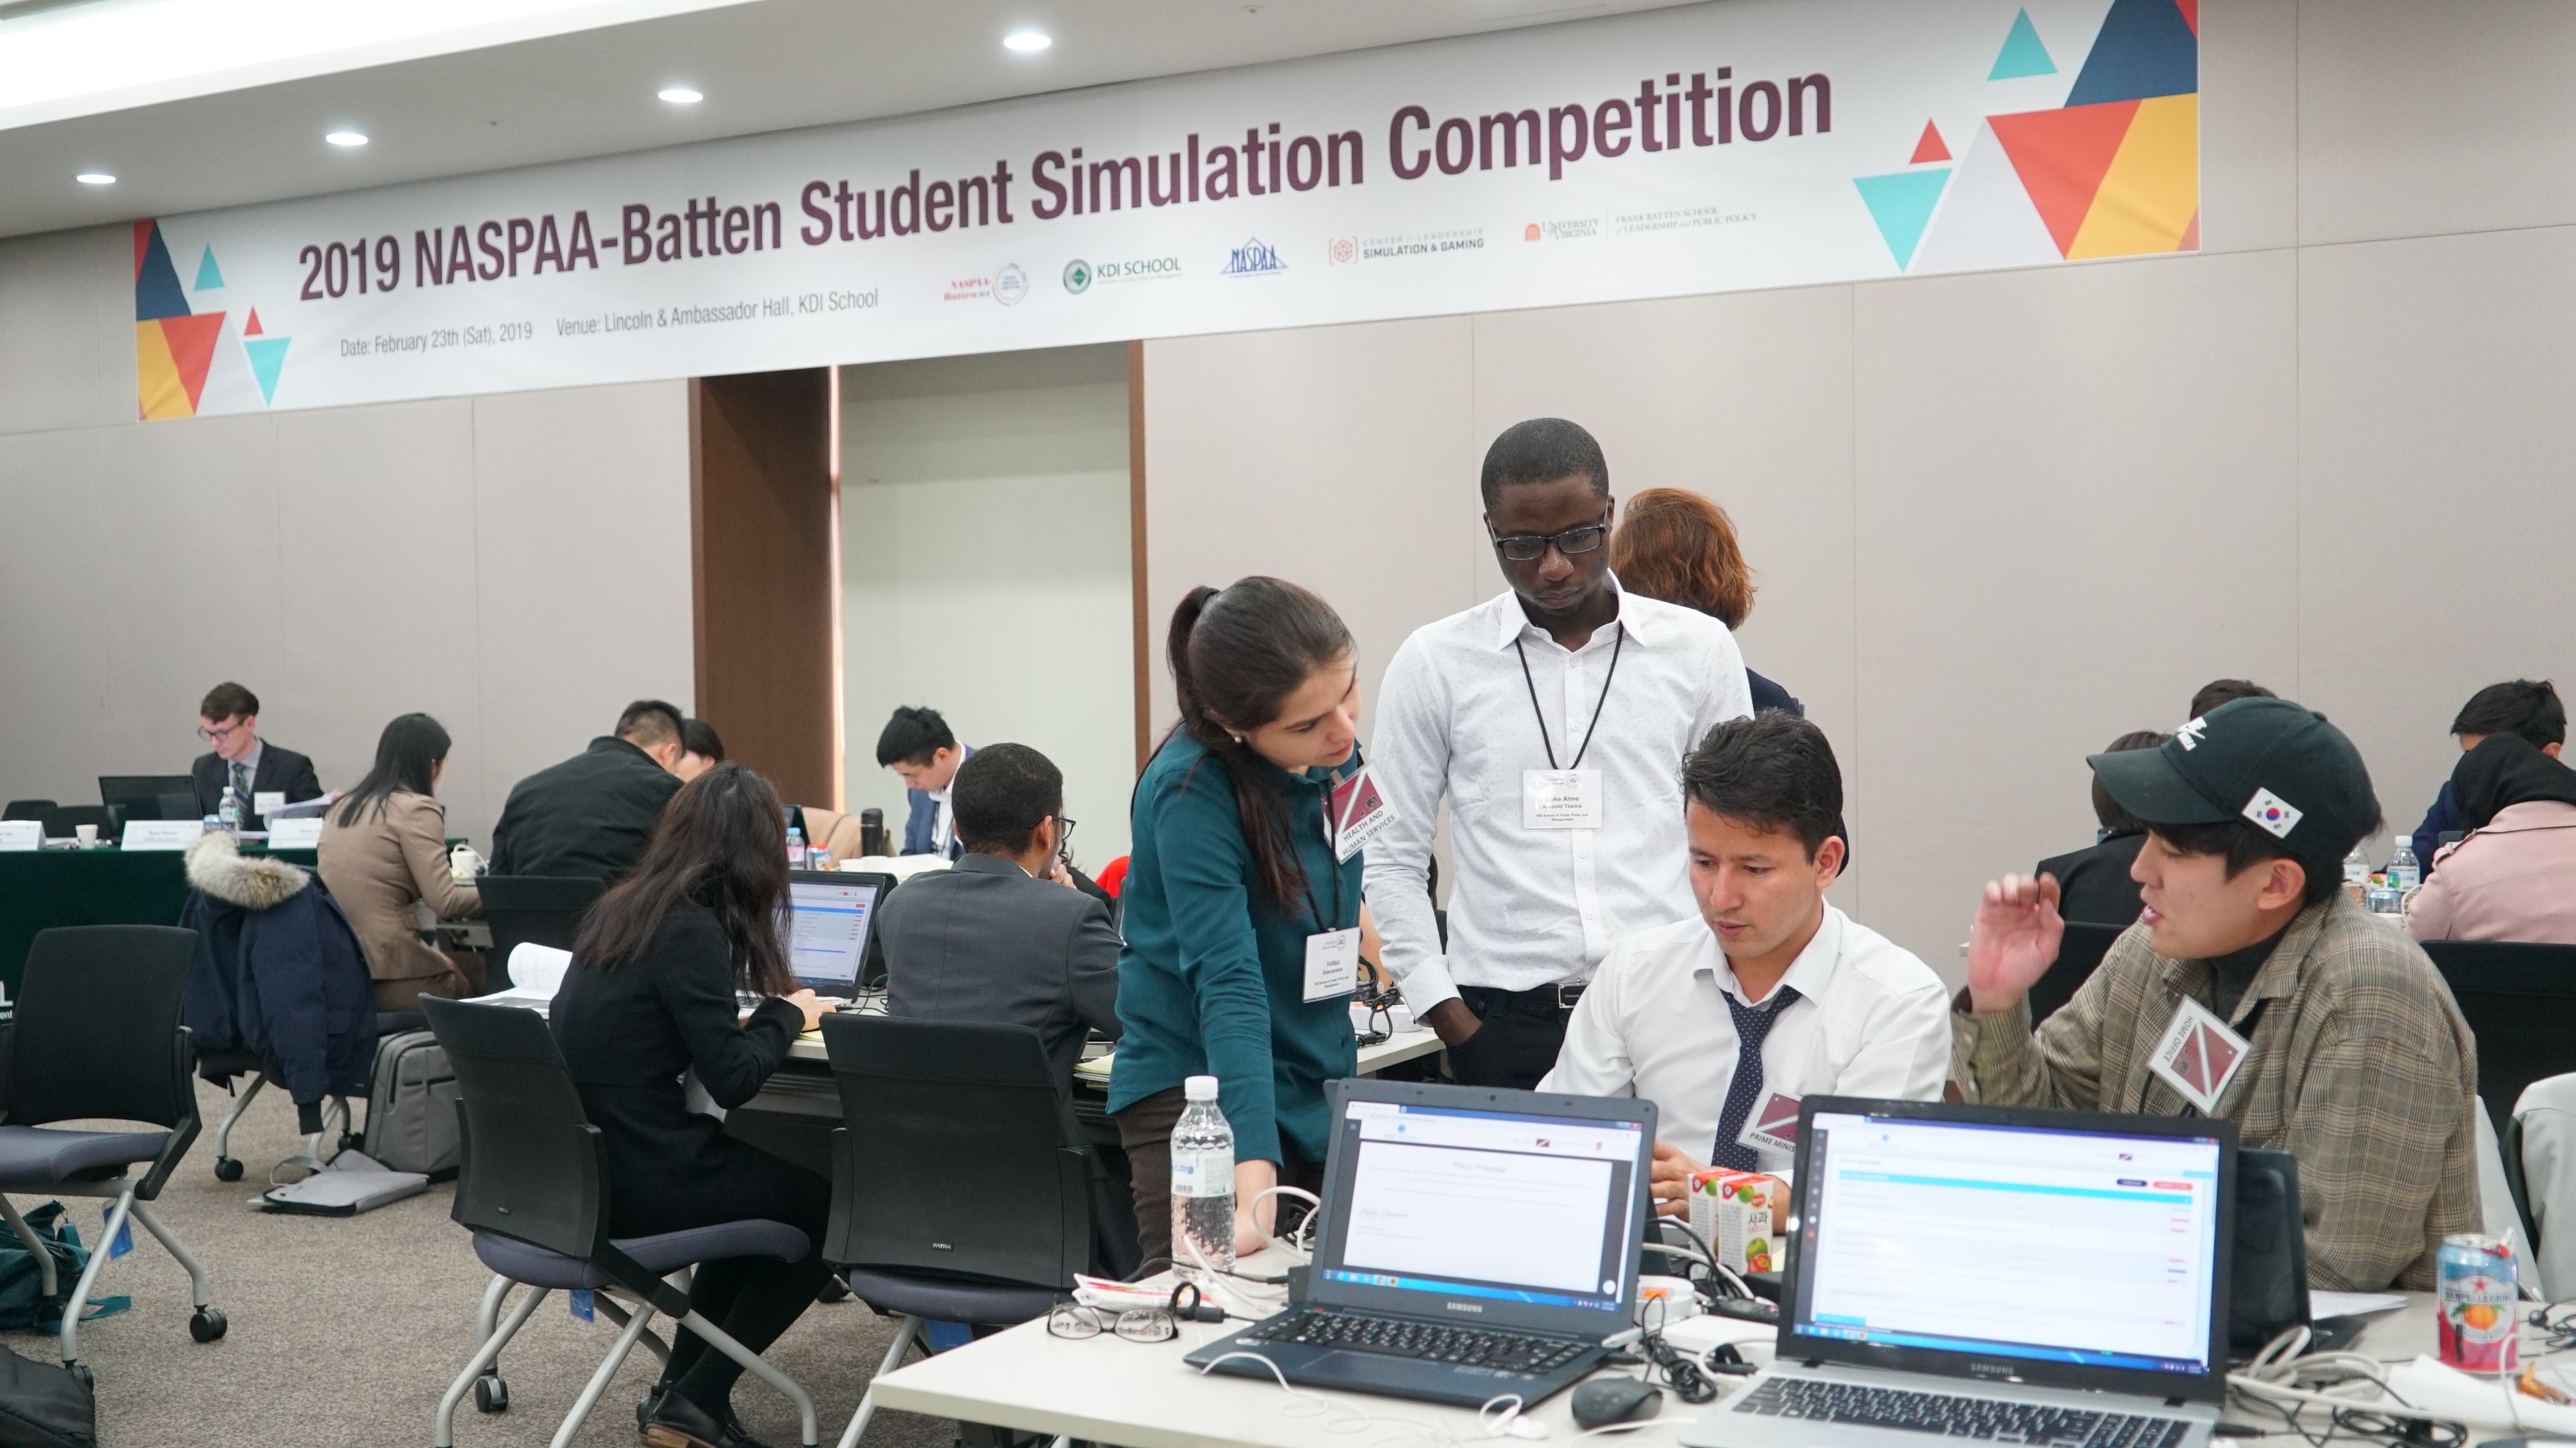 NASPAA-Batten Student Simulation: The Victory is for All KDIS Family